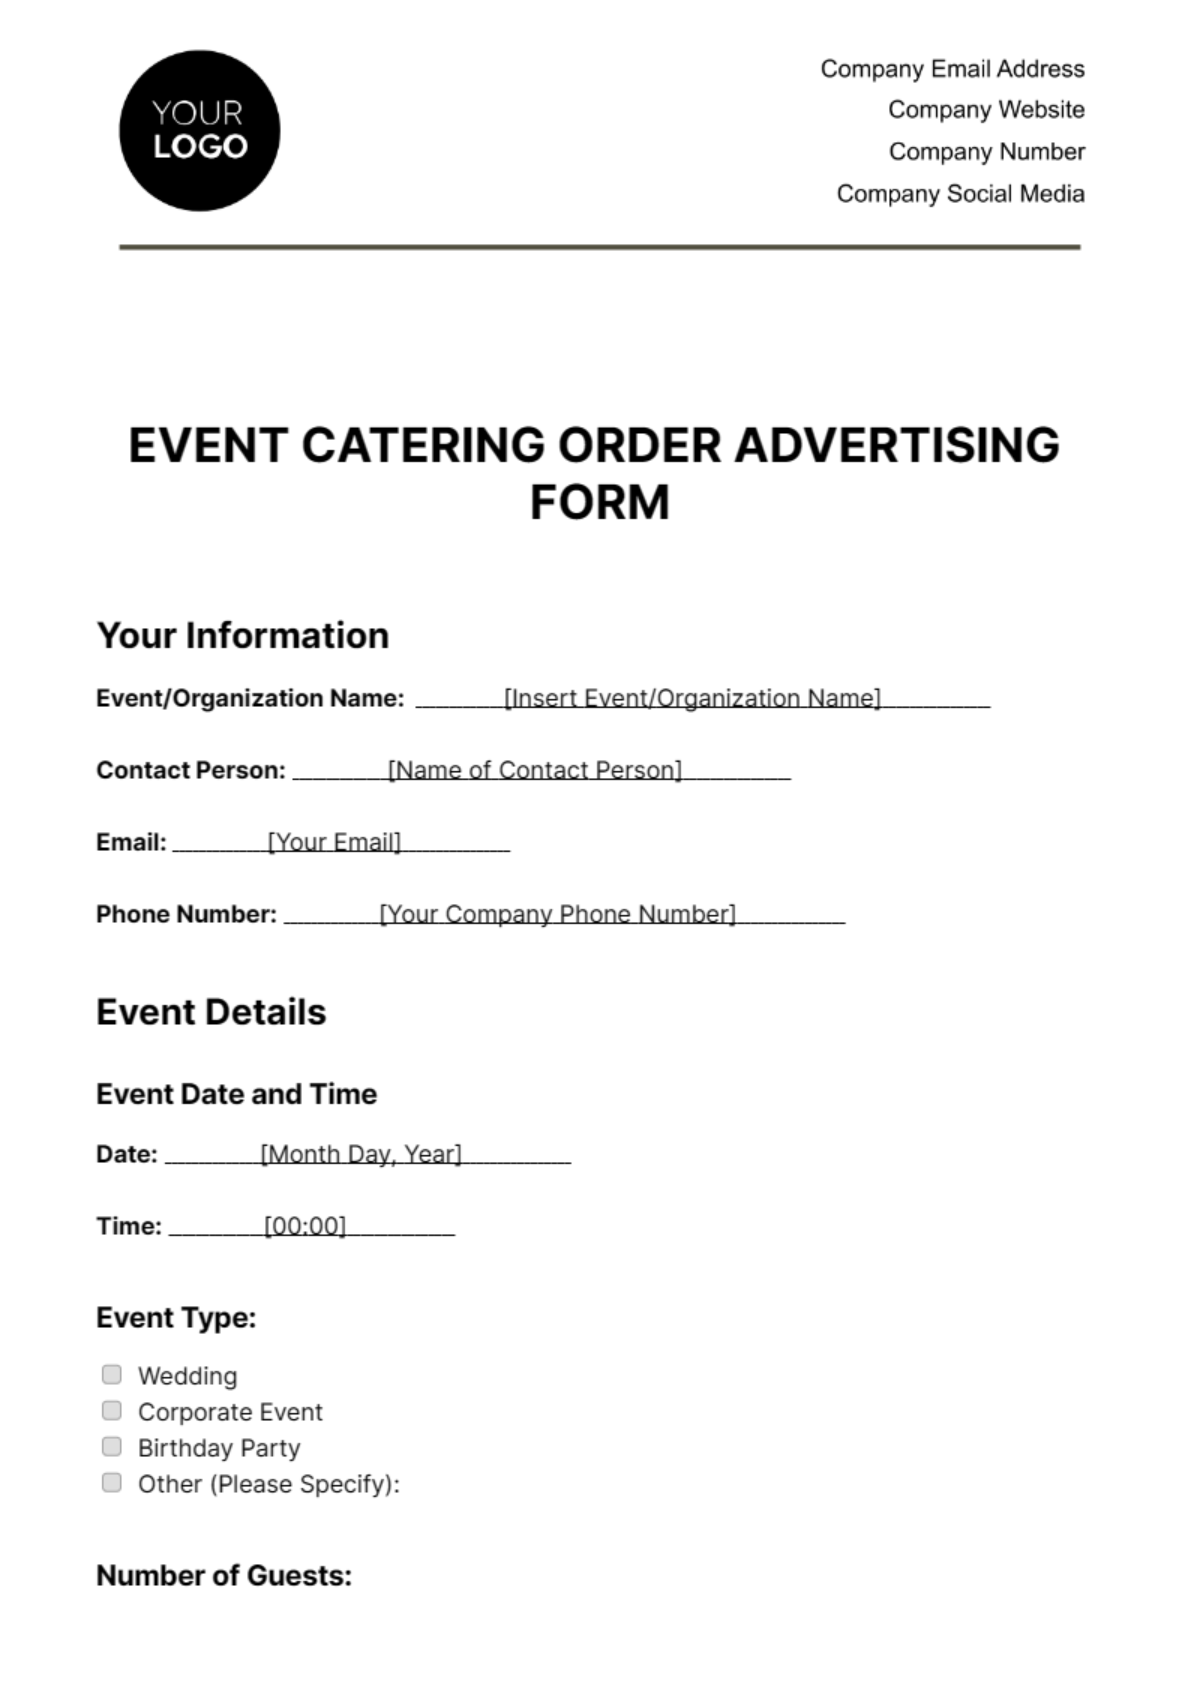 Event Catering Order Advertising Form Template